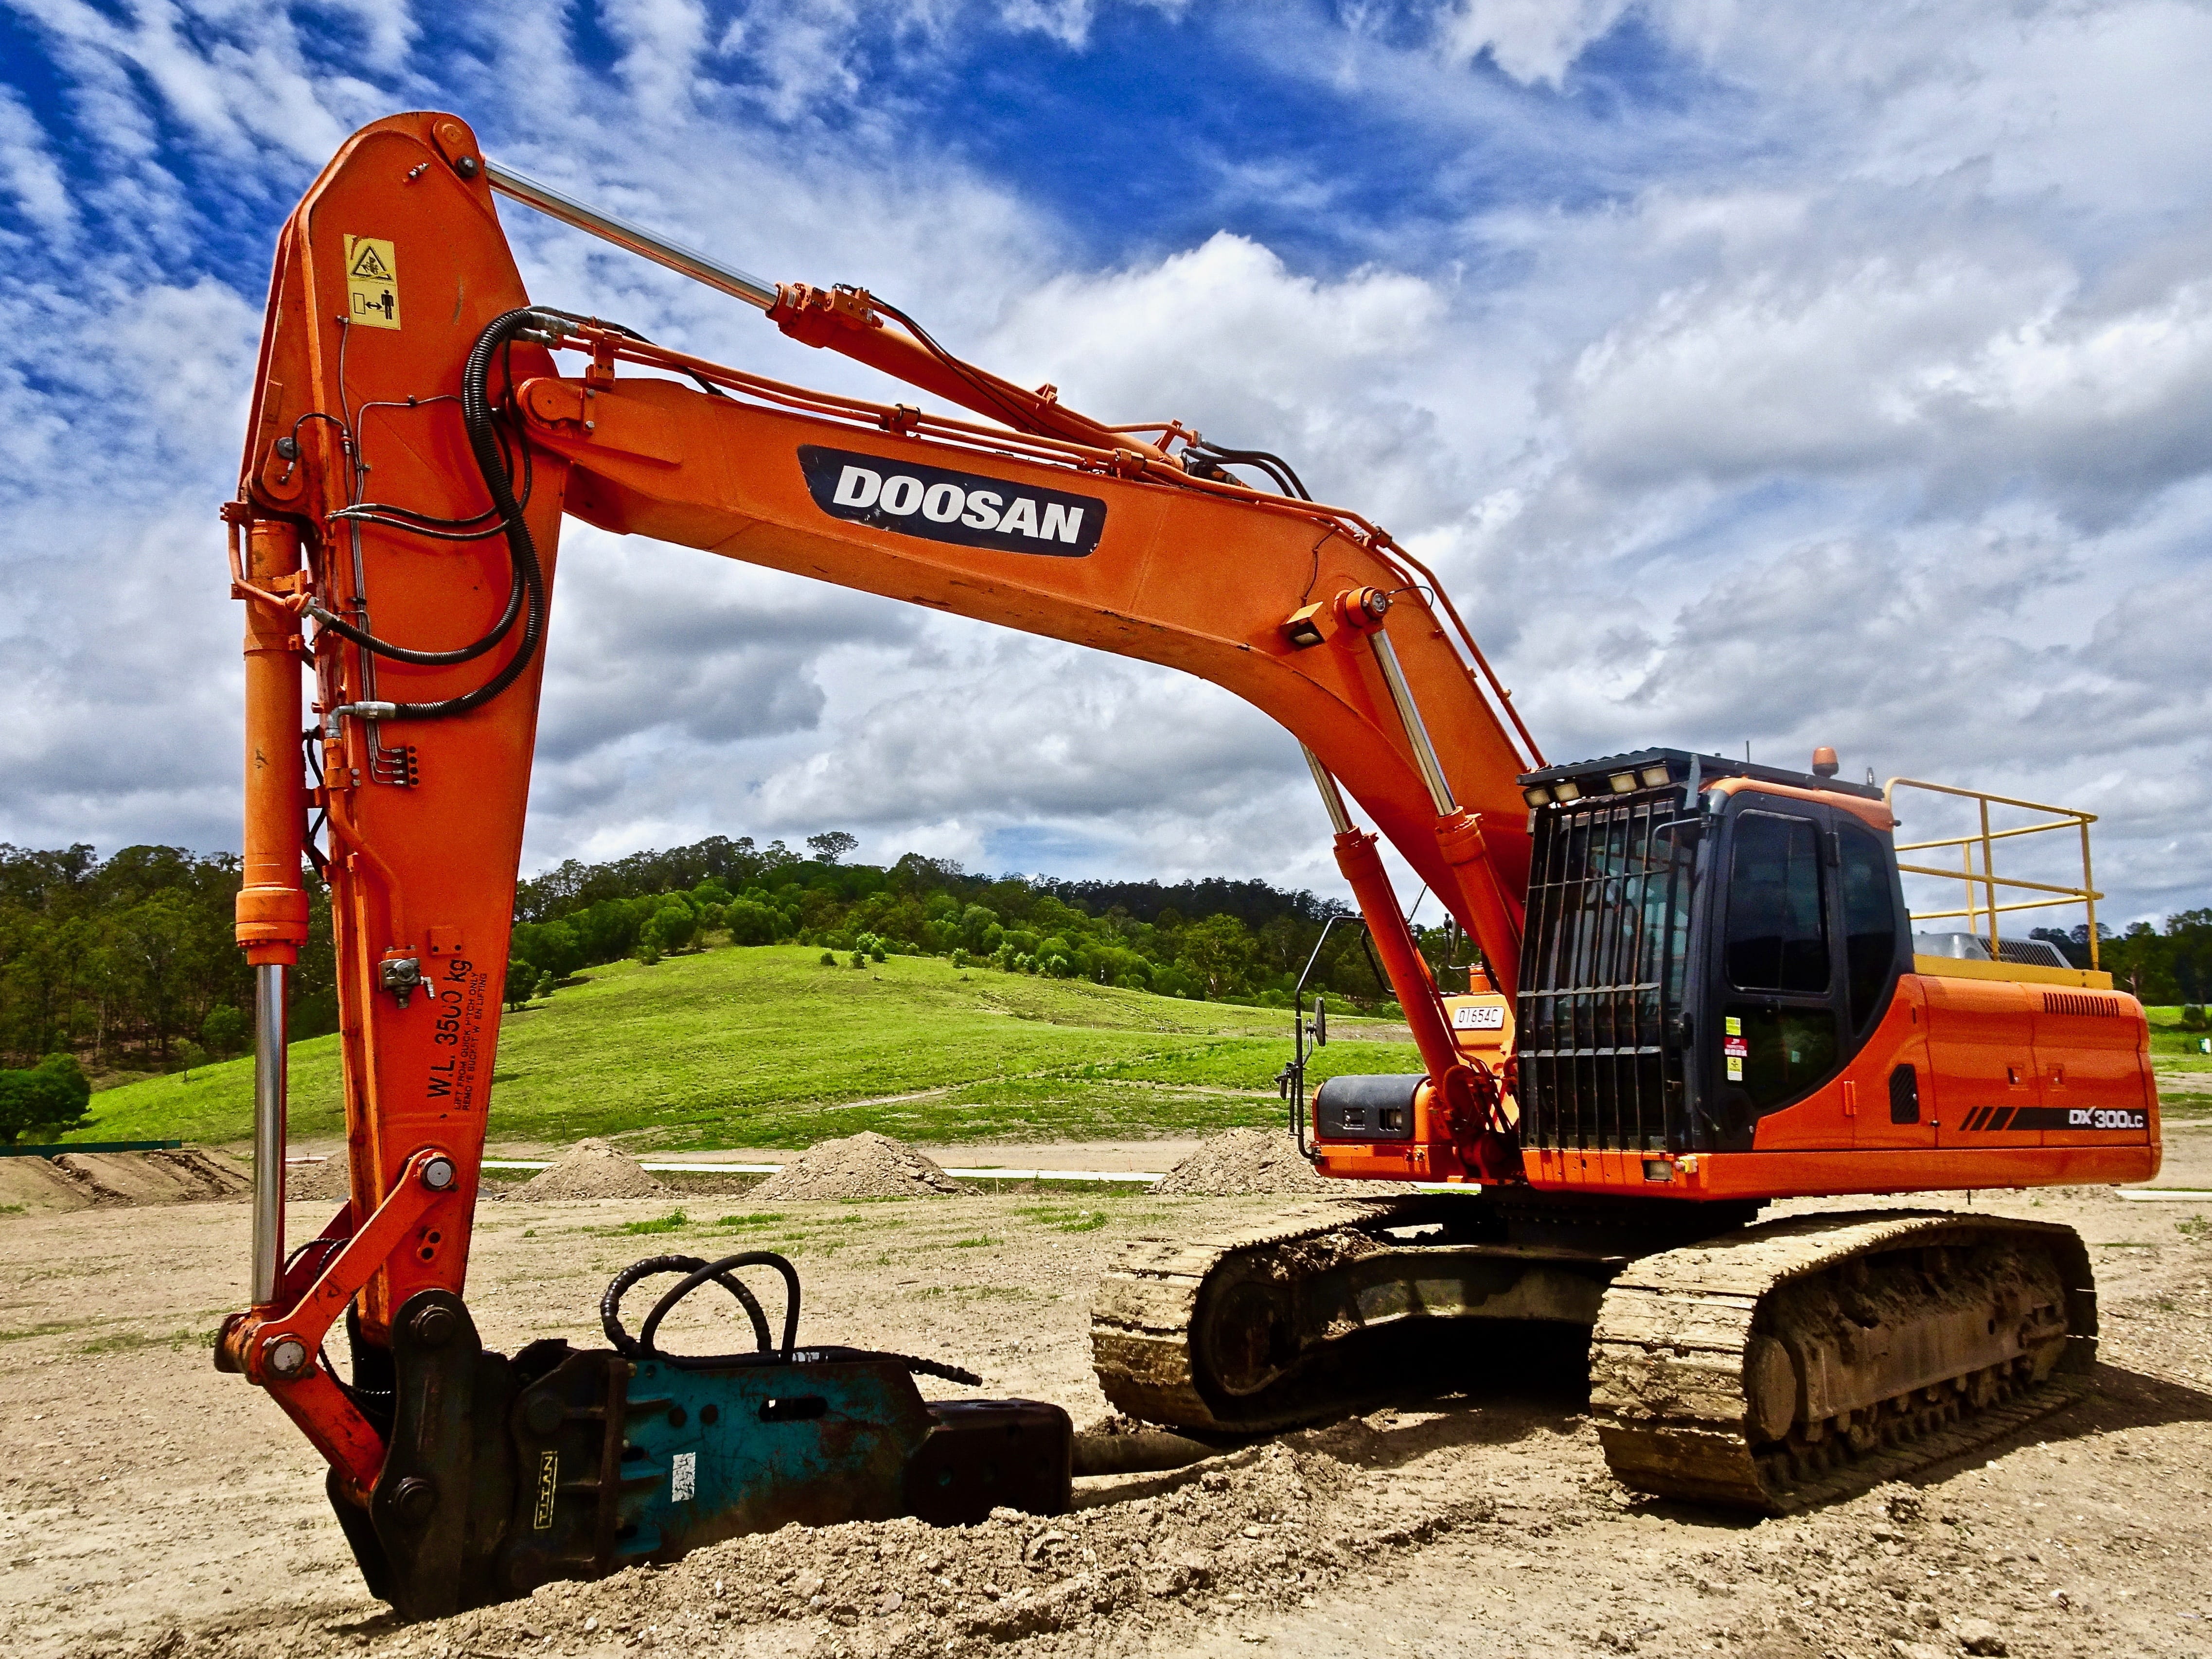 Machinery, Digger, Excavator, construction, equipment, earthmover